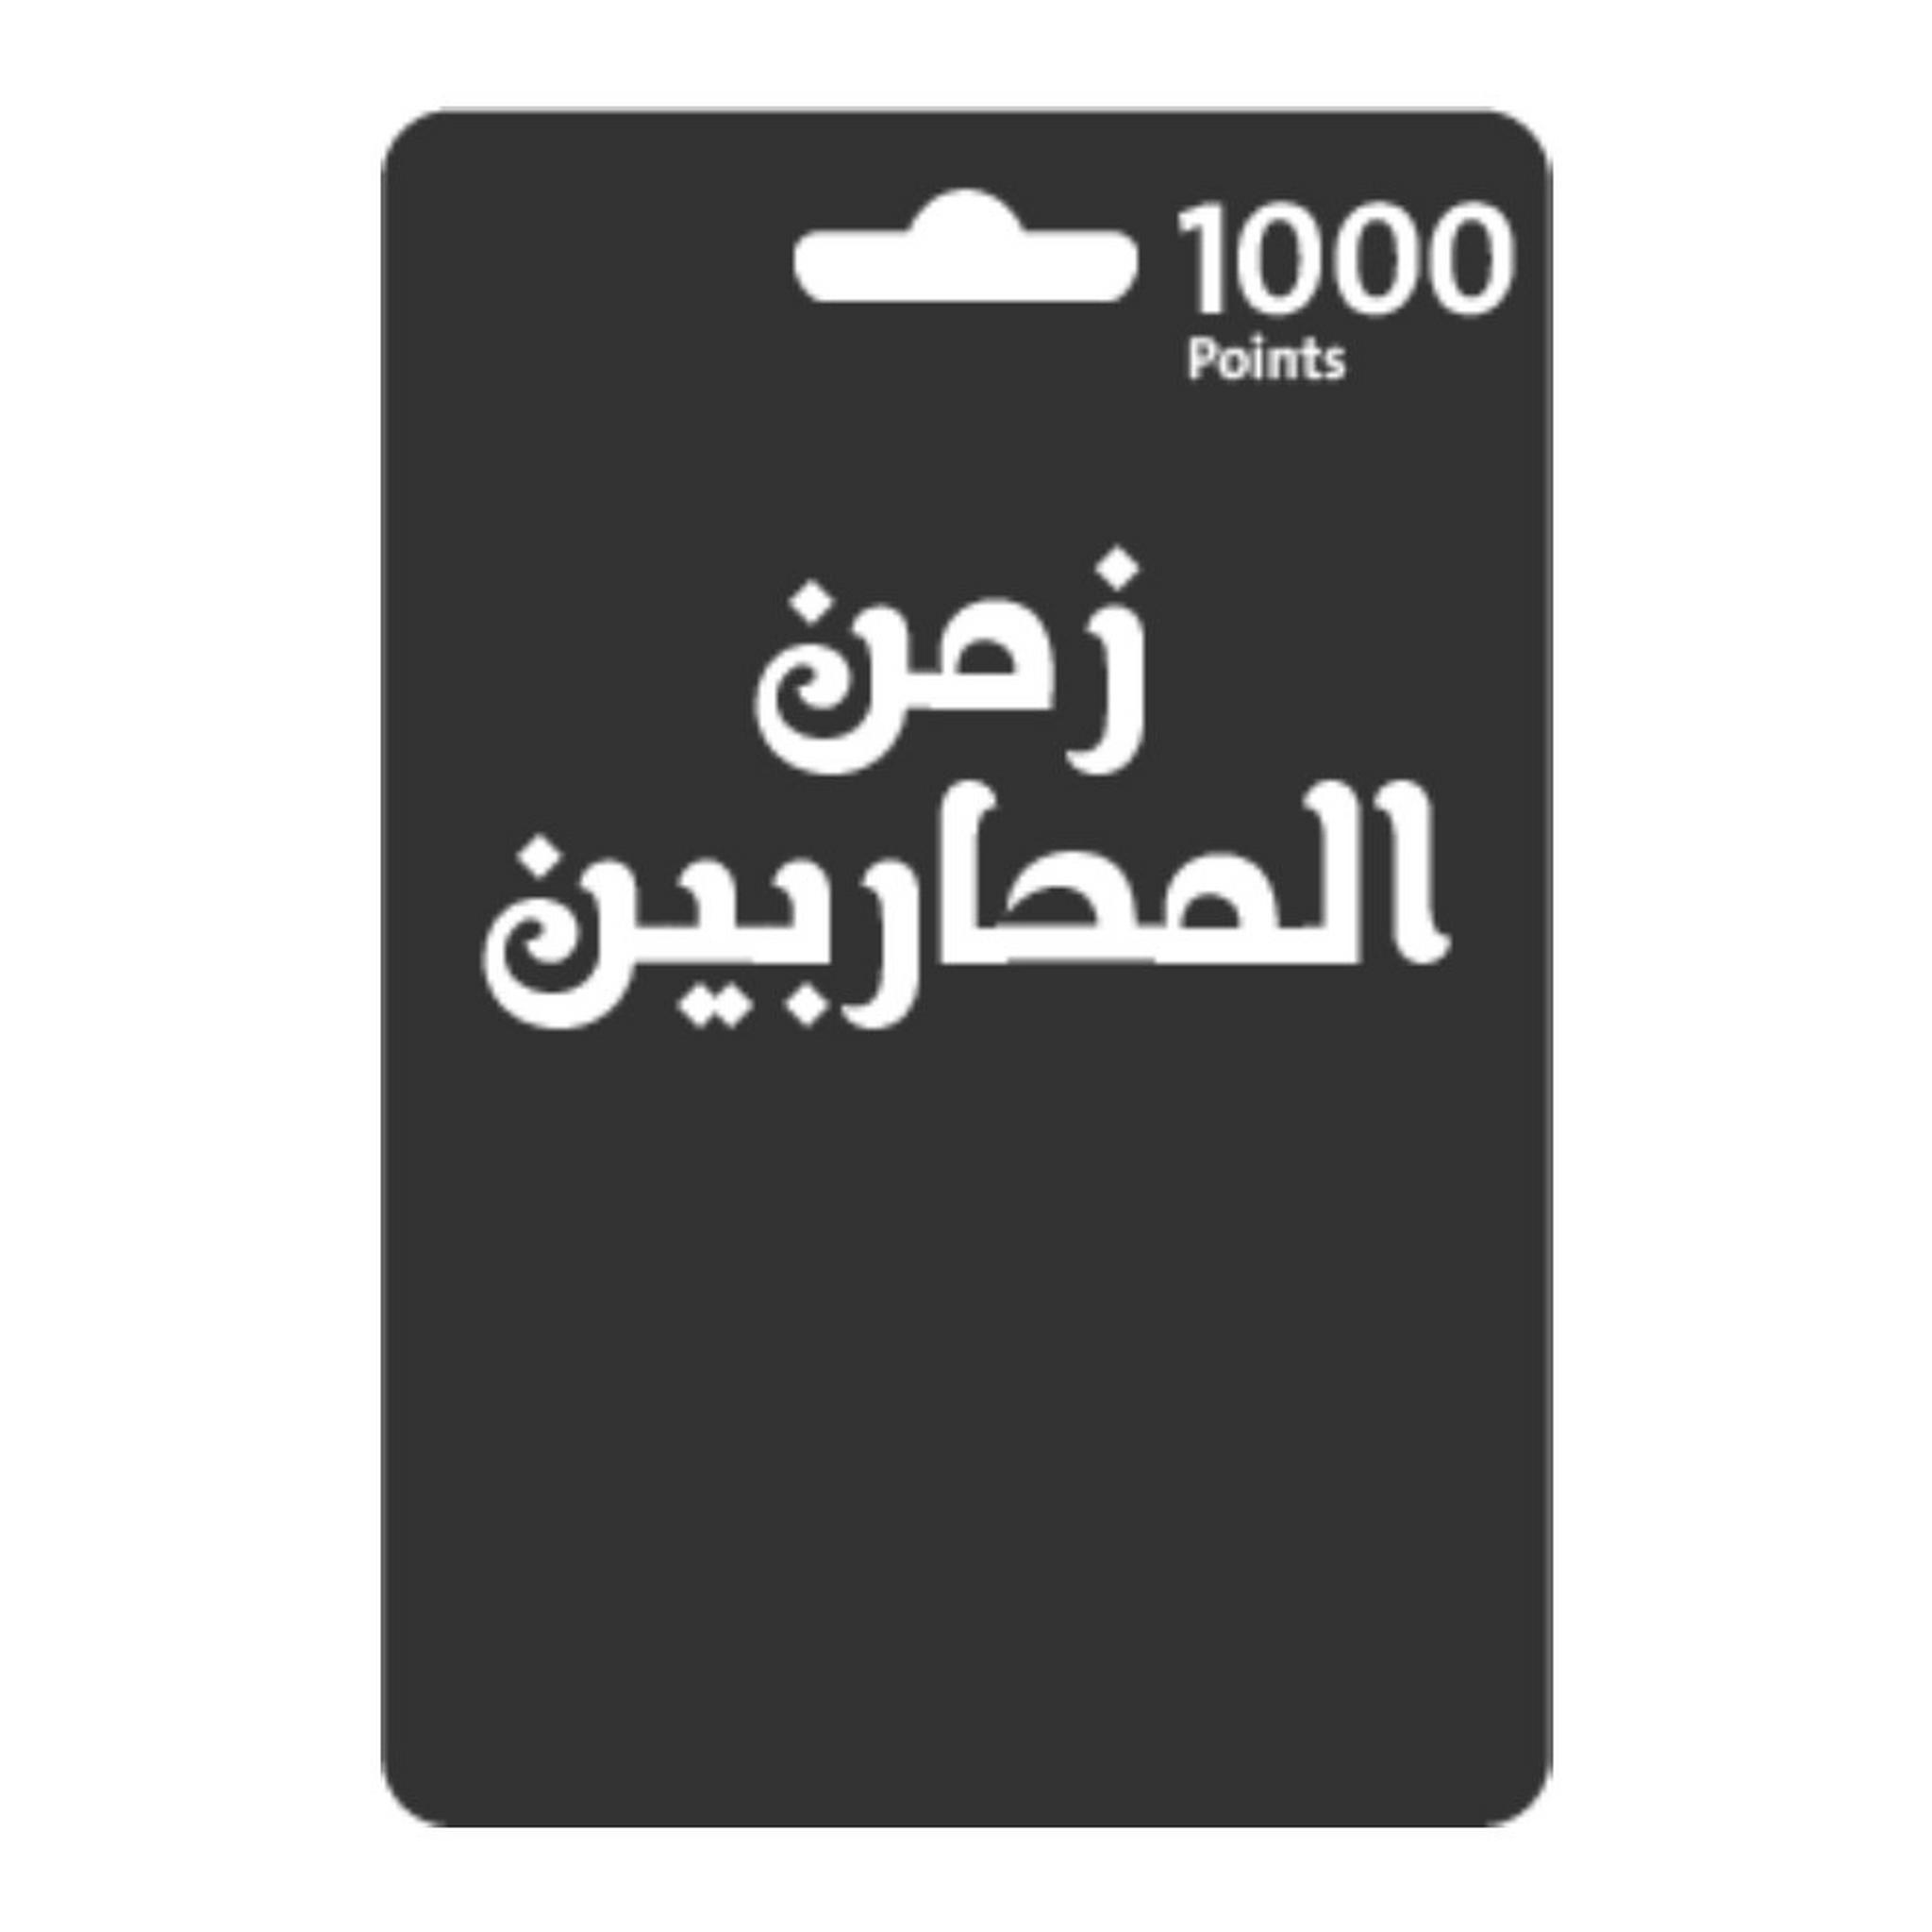 Zaman Almoharbeen 1000 Points Card